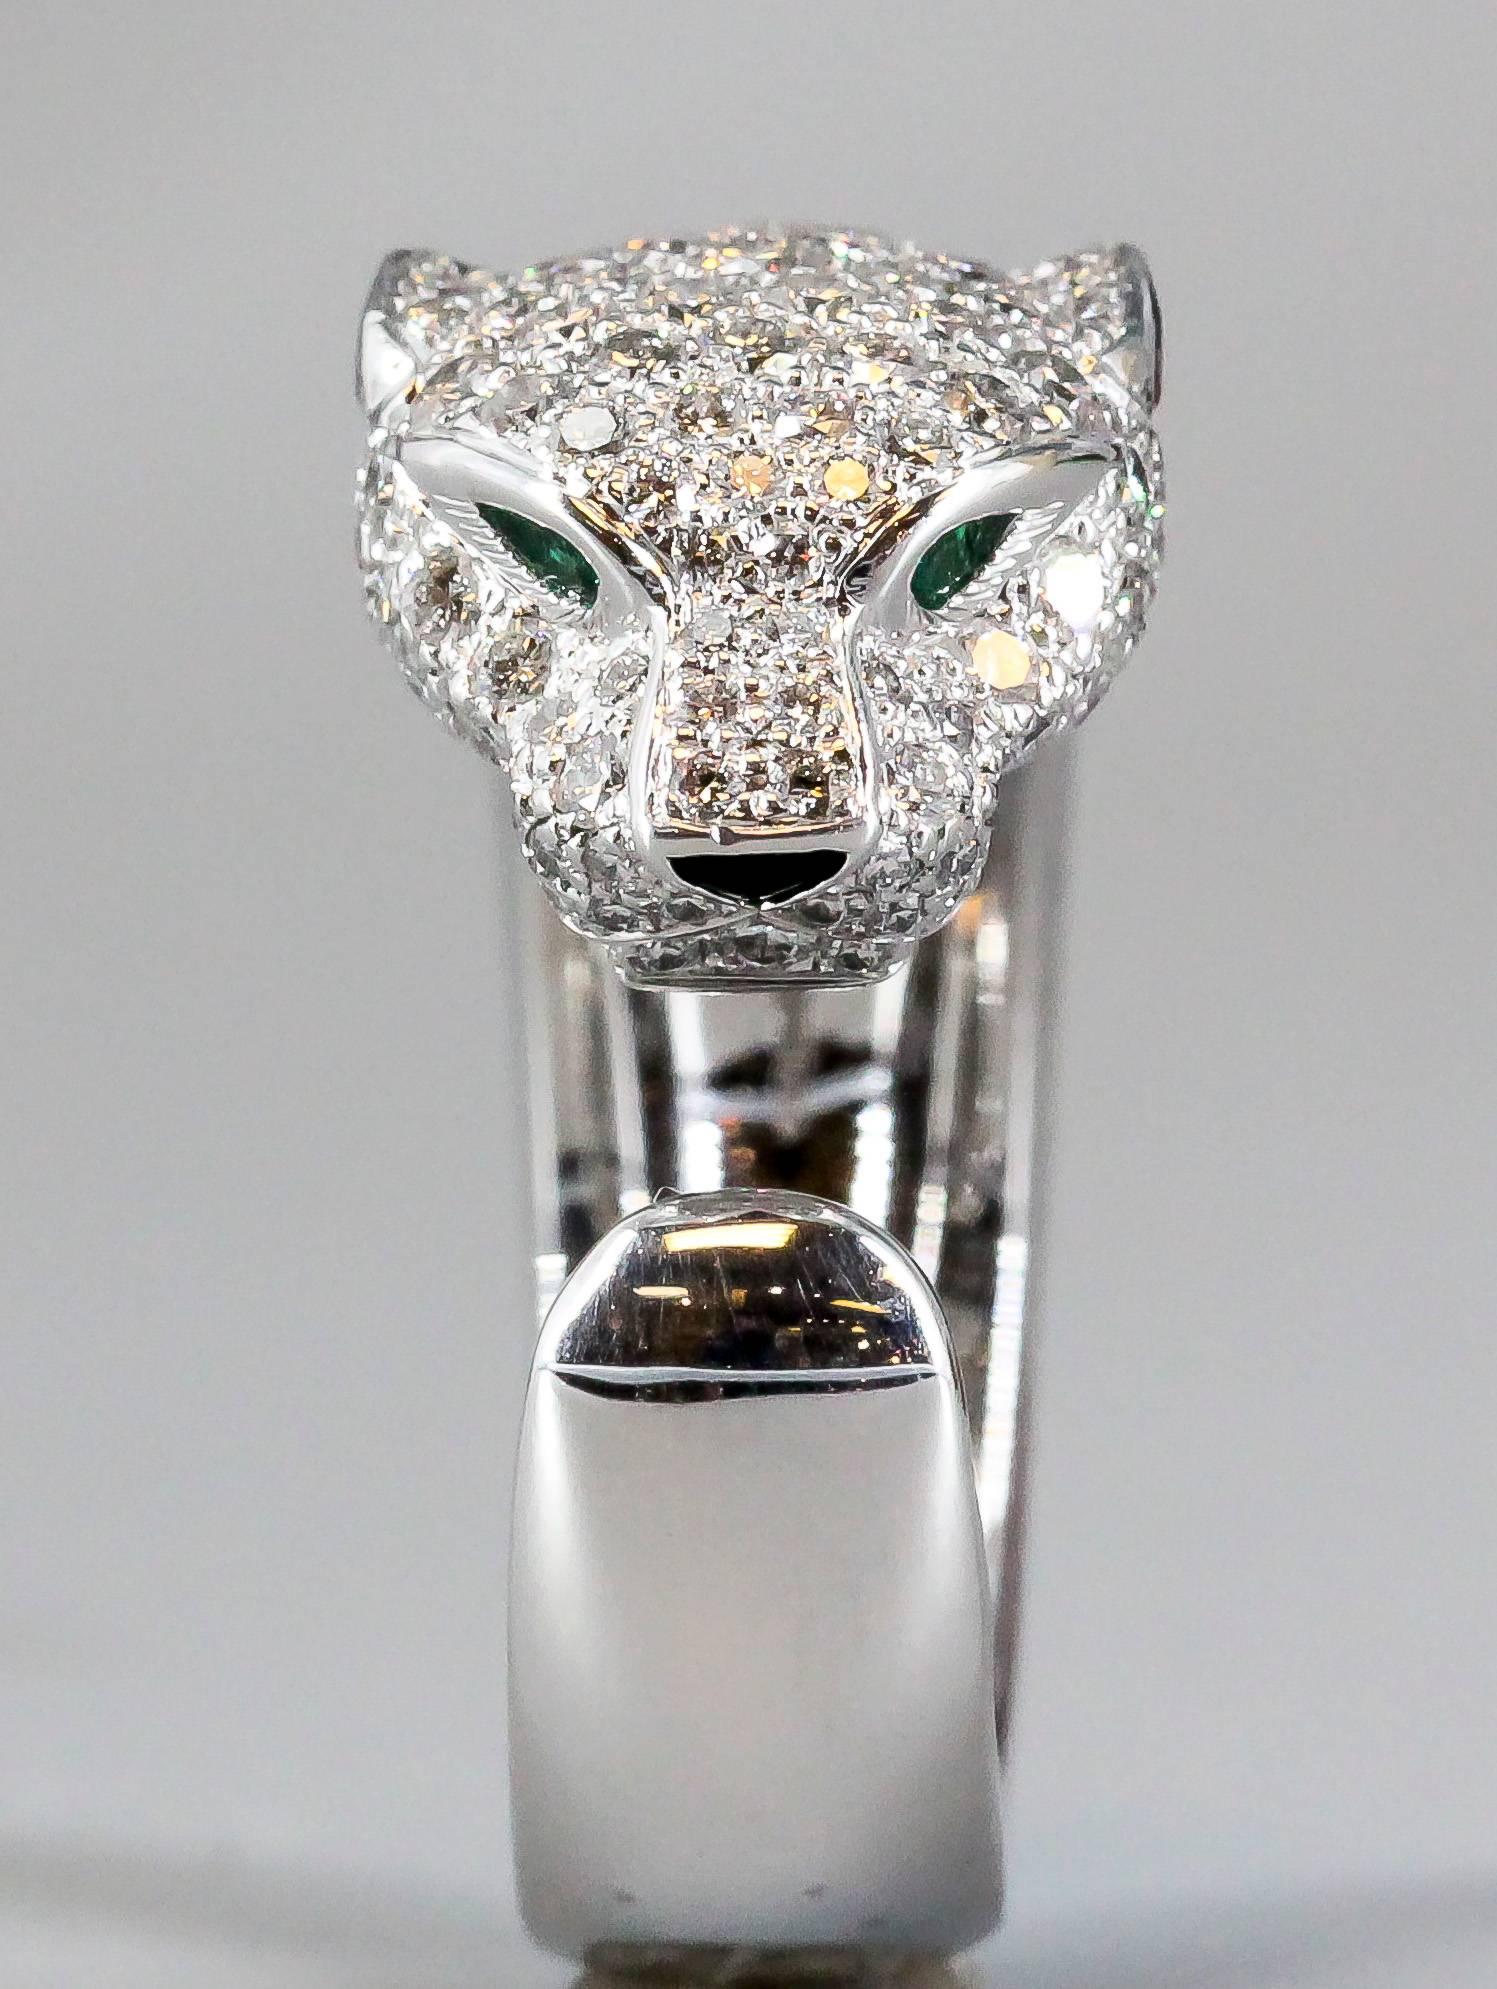 Timeless diamond, emerald, onyx and 18K white gold ring from the "Panthere" collection by Cartier. It features high grade round brilliant cut diamonds throughout the head and mane of the panther at the top of the ring. The emeralds serve